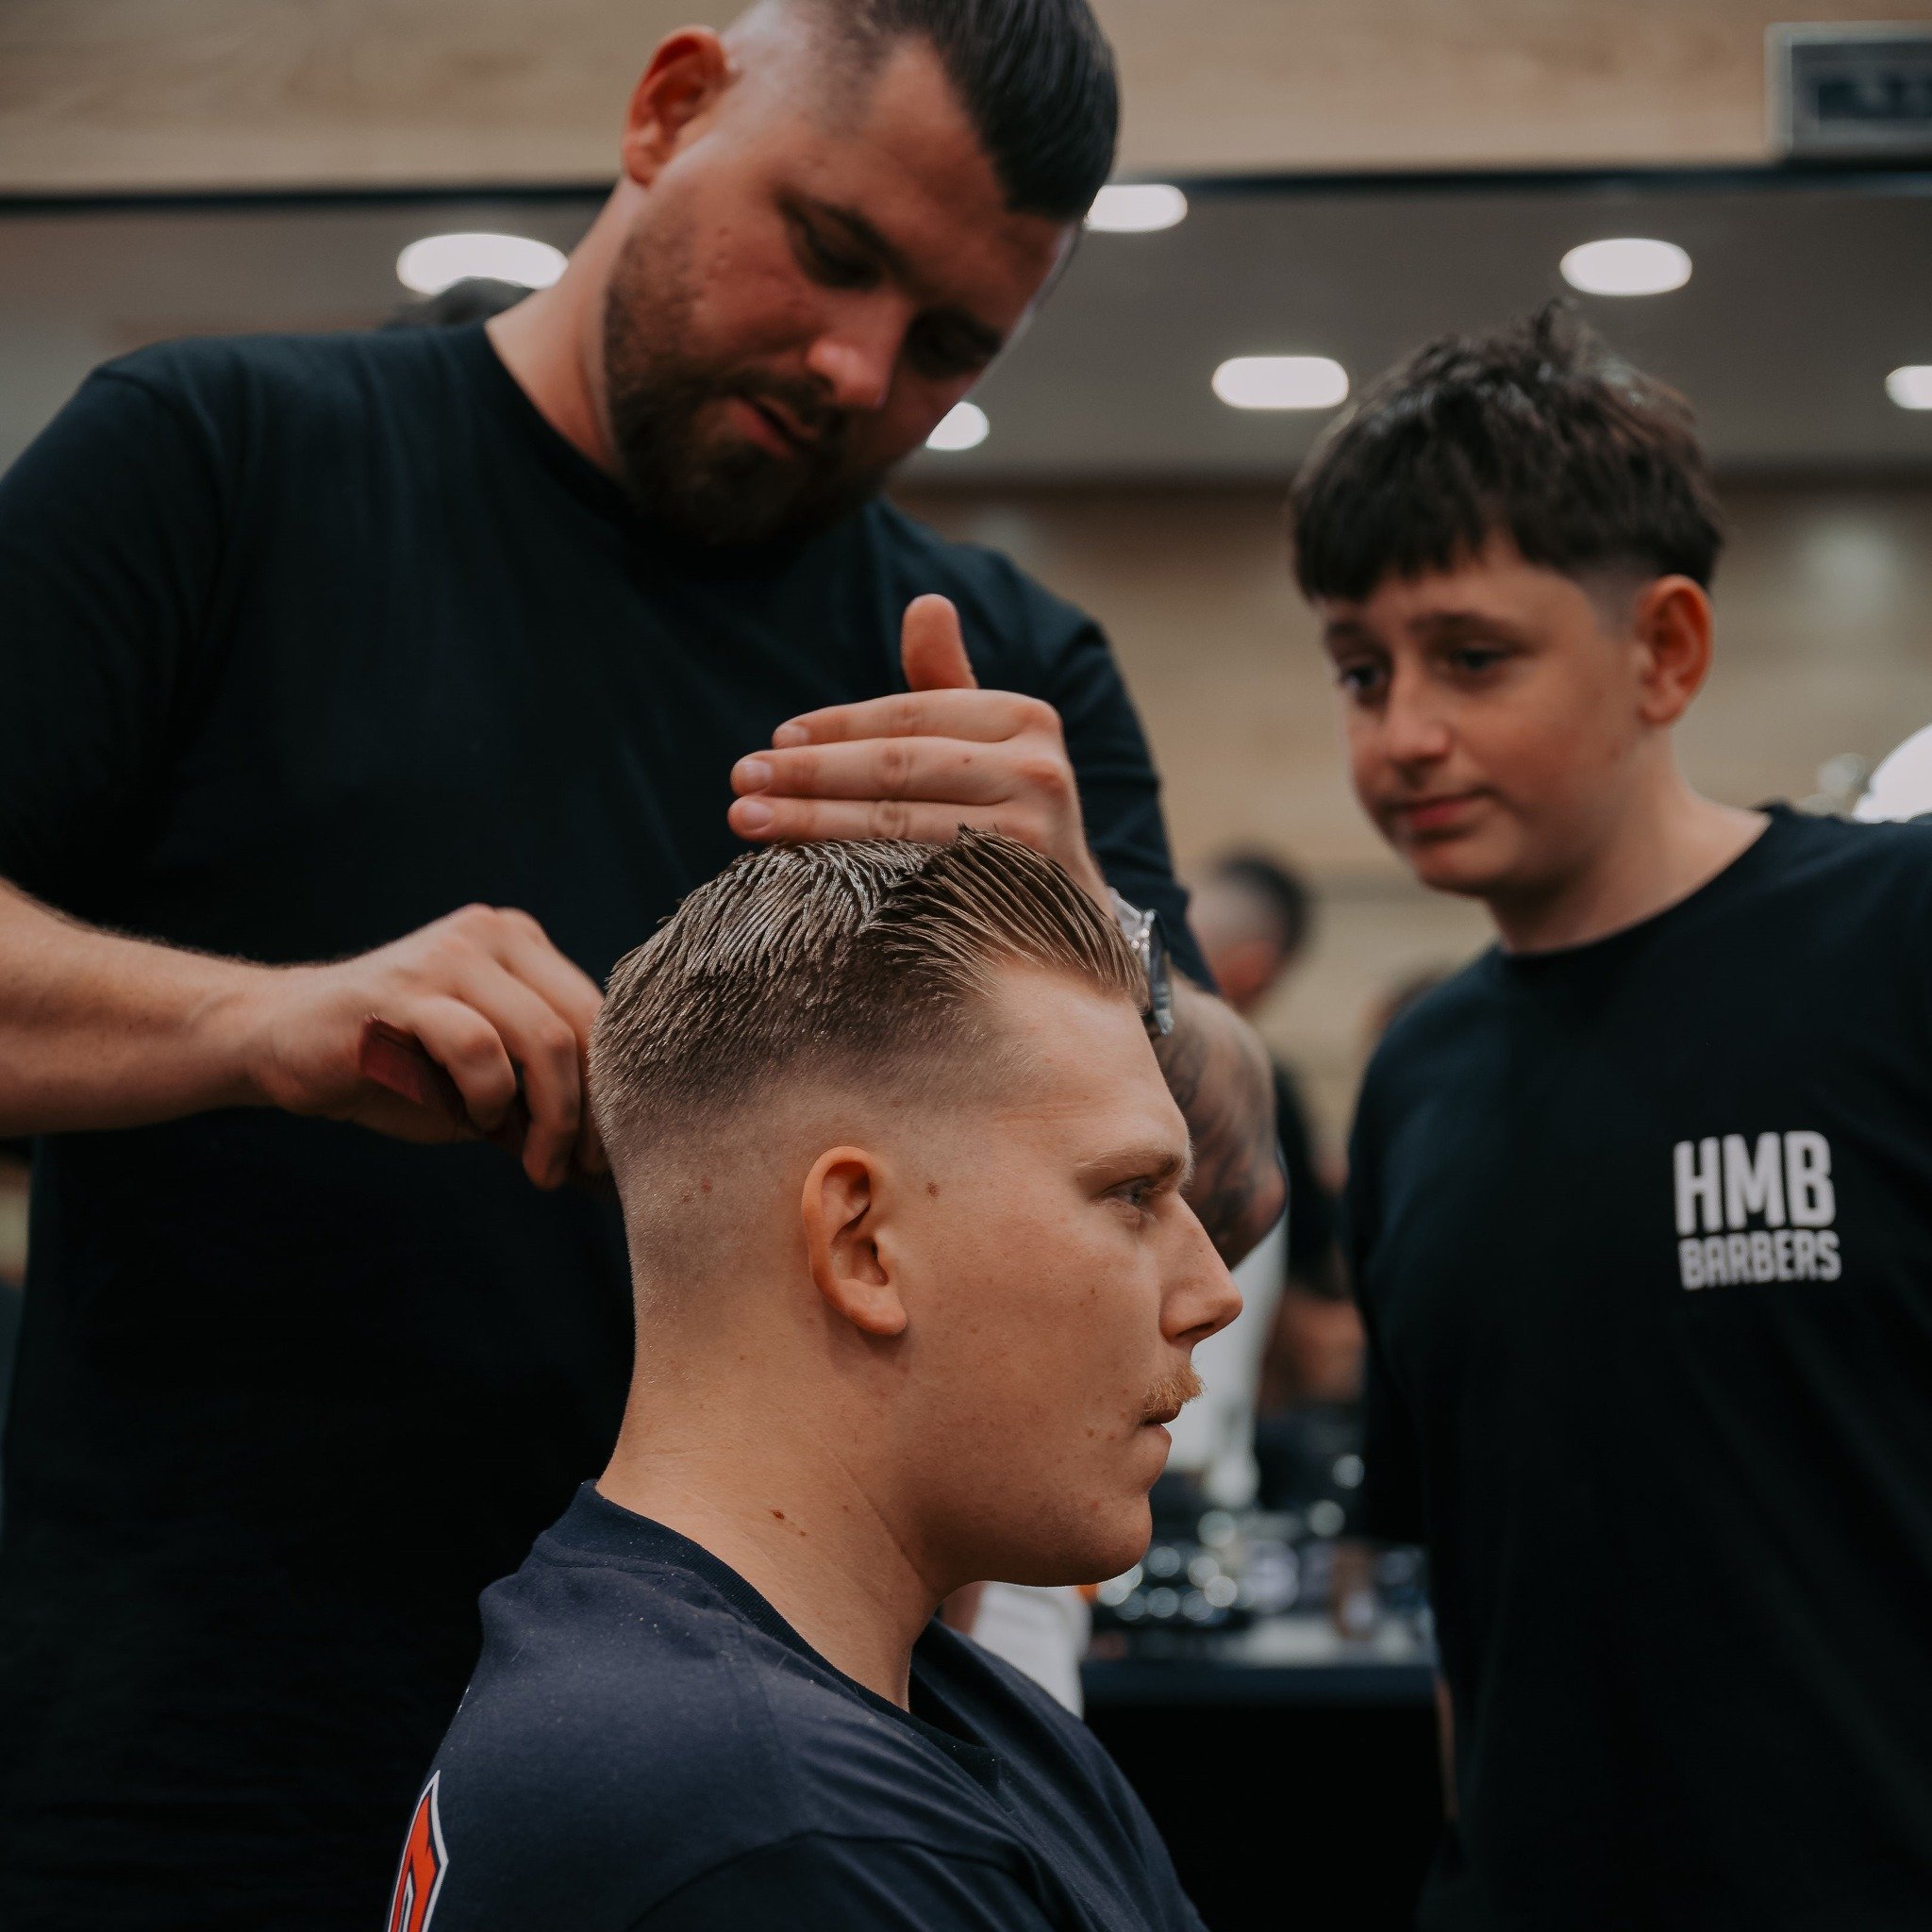 Did you know all HMB Barbers are offered extensive barber education through @4barbersau? 

We want to give our customers only the best.

#HMBBarbers #BarberLife #BarberShop #BarberLove #Barbering #QueenslandBarber #QLDBarber #BrisbaneBarber #Sunshine